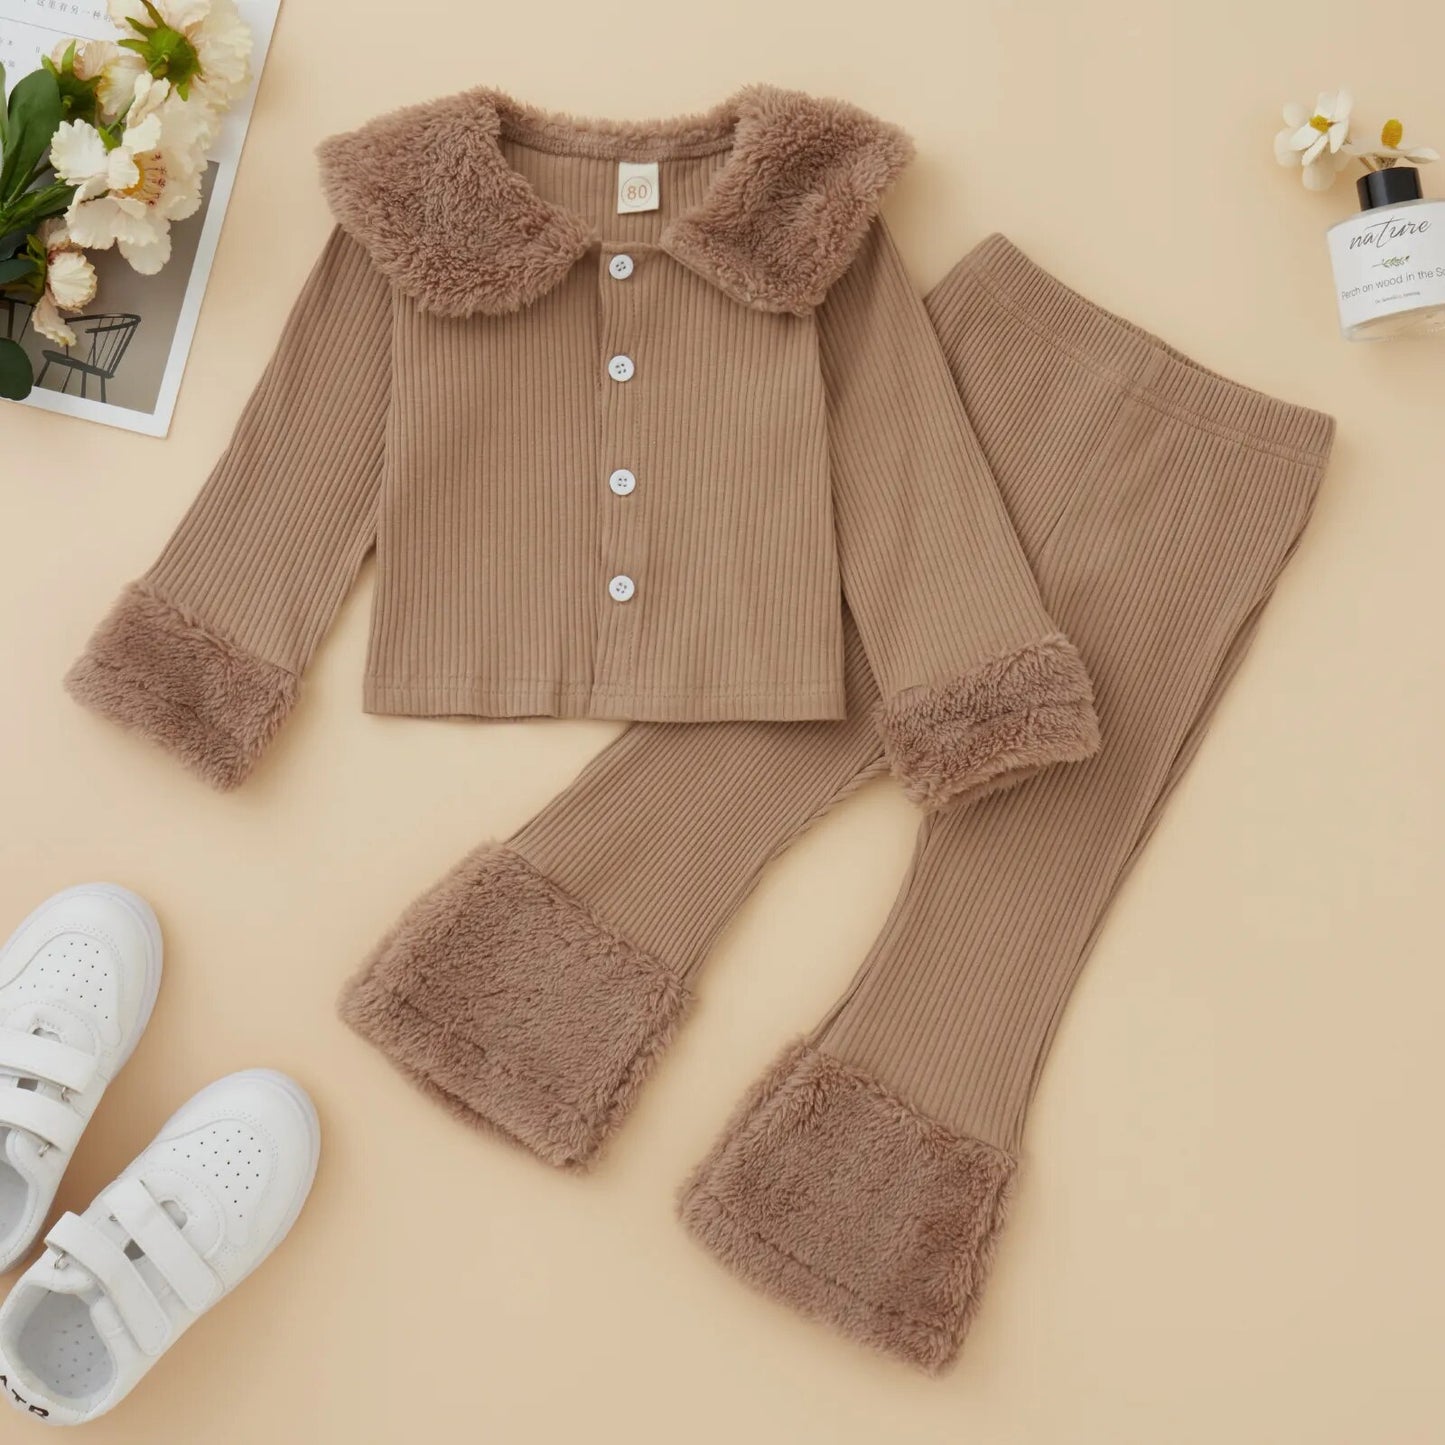 Toddler Baby Girls Knitted Tracksuits Casual Autumn Winter Lapel Button Long Sleeved Jacket + Pants Children Plush Outwear Set